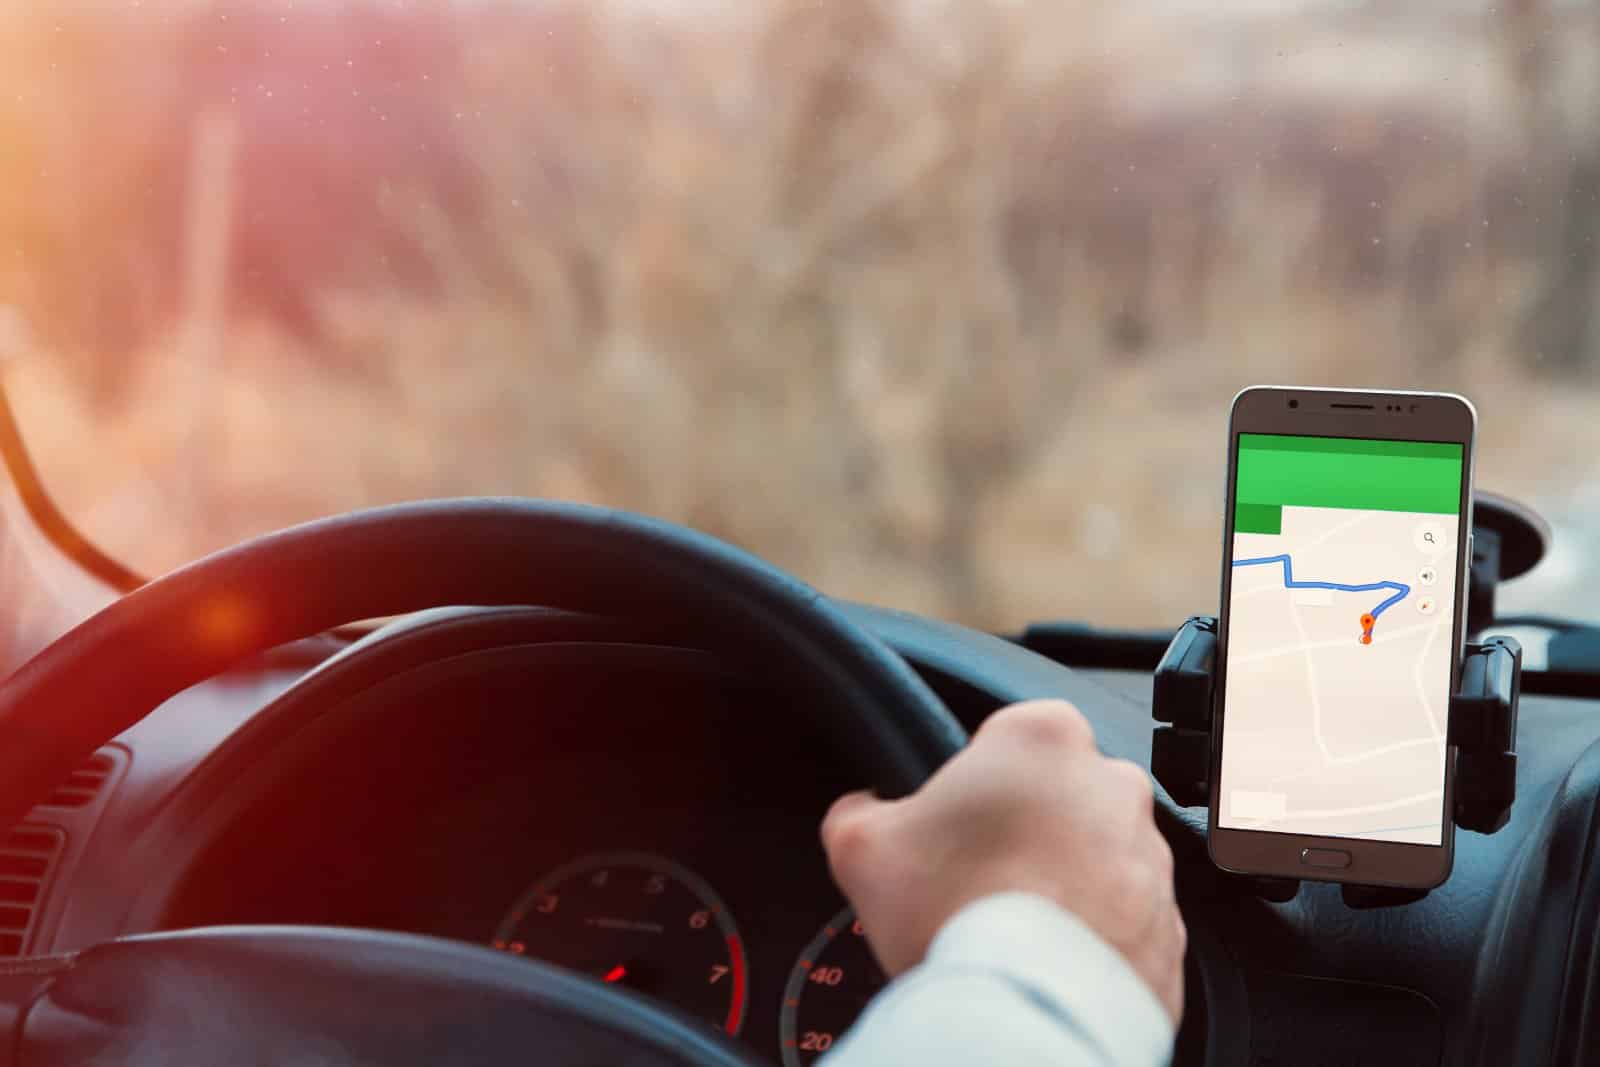 <p class="wp-caption-text">Image Credit: Shutterstock / Daniel Tadevosyan</p>  <p><span>Whether it’s a GPS device or a smartphone app, reliable navigation tools are essential. Just remember to download offline maps to keep you on track even without cell service.</span></p>